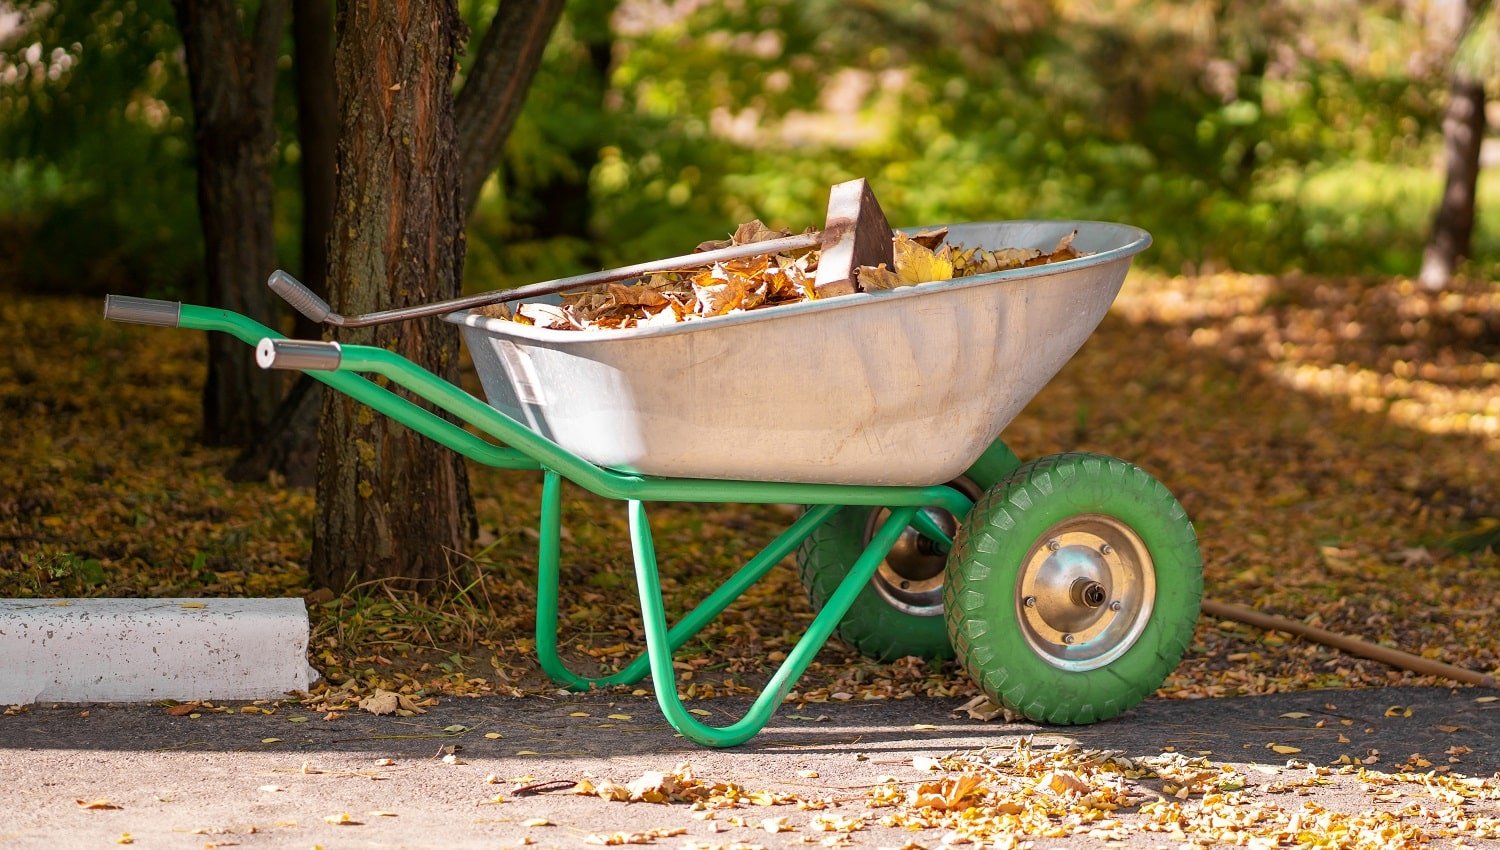 A metal wheelbarrow for a gardener who collects fallen yellow leaves into it in a park.